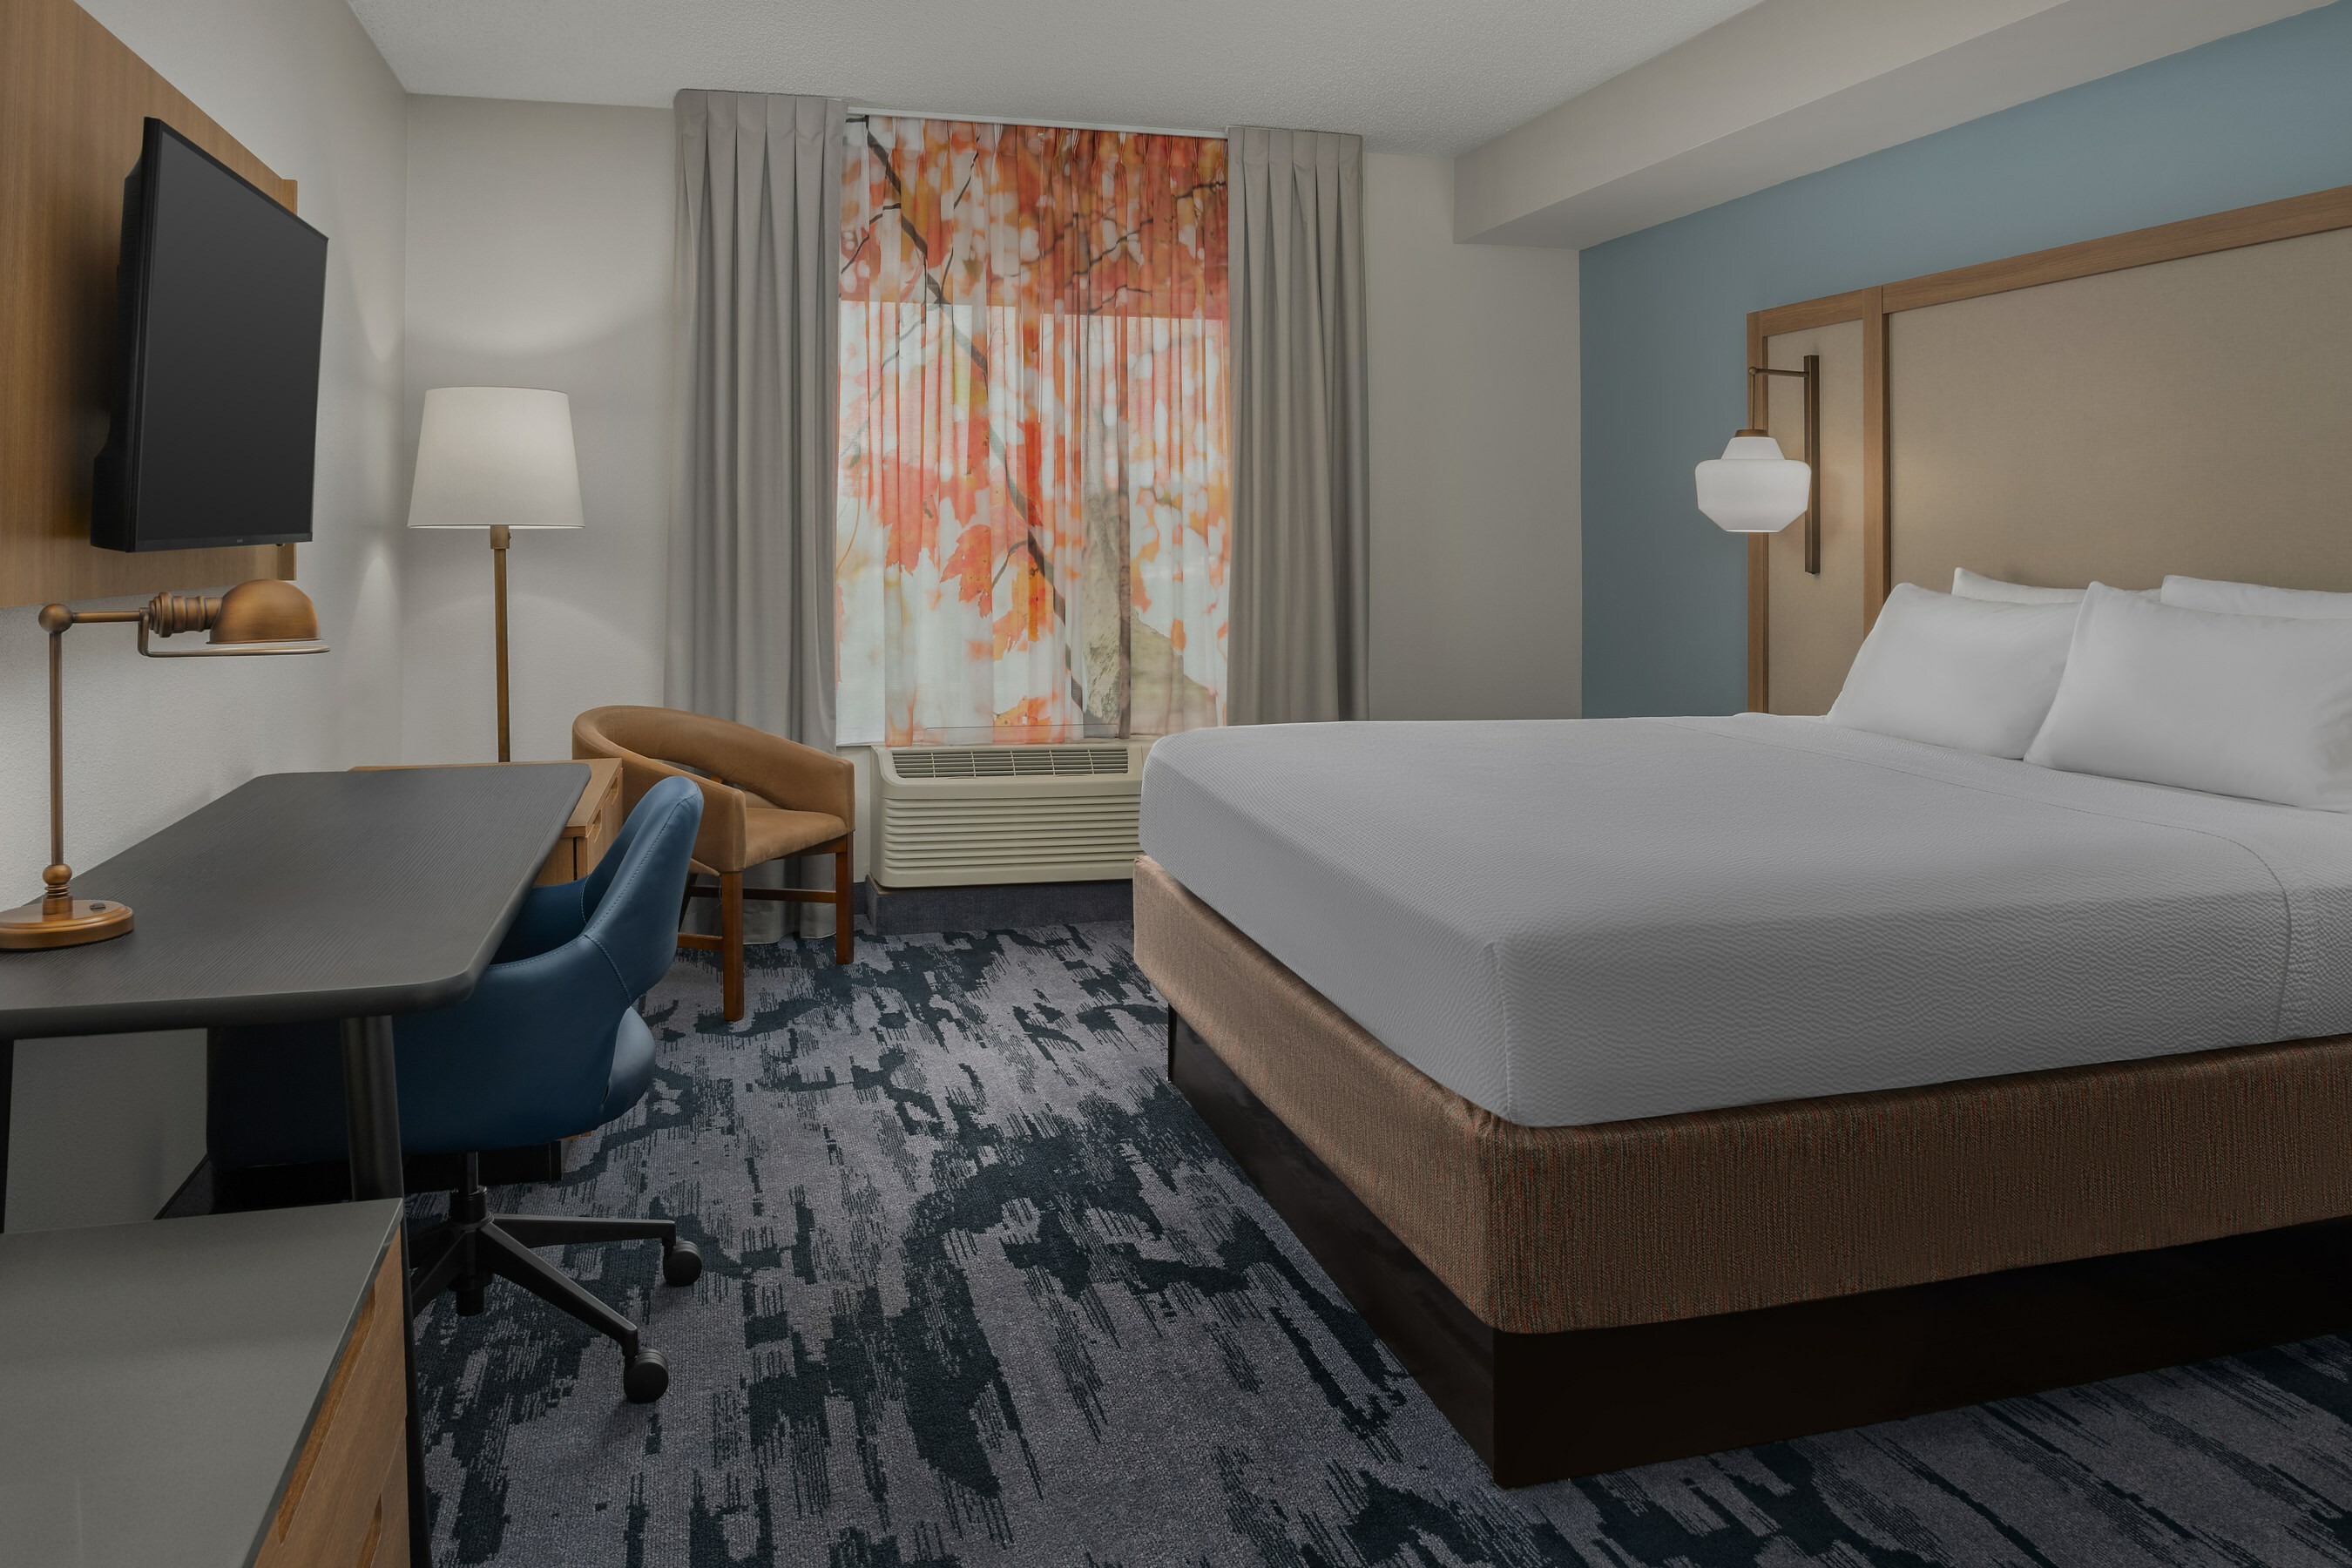 Rooms at the Fairfield Inn  Suites by Marriott Roanoke HollinsI-81 hotel offer guests modern style and ample amenities